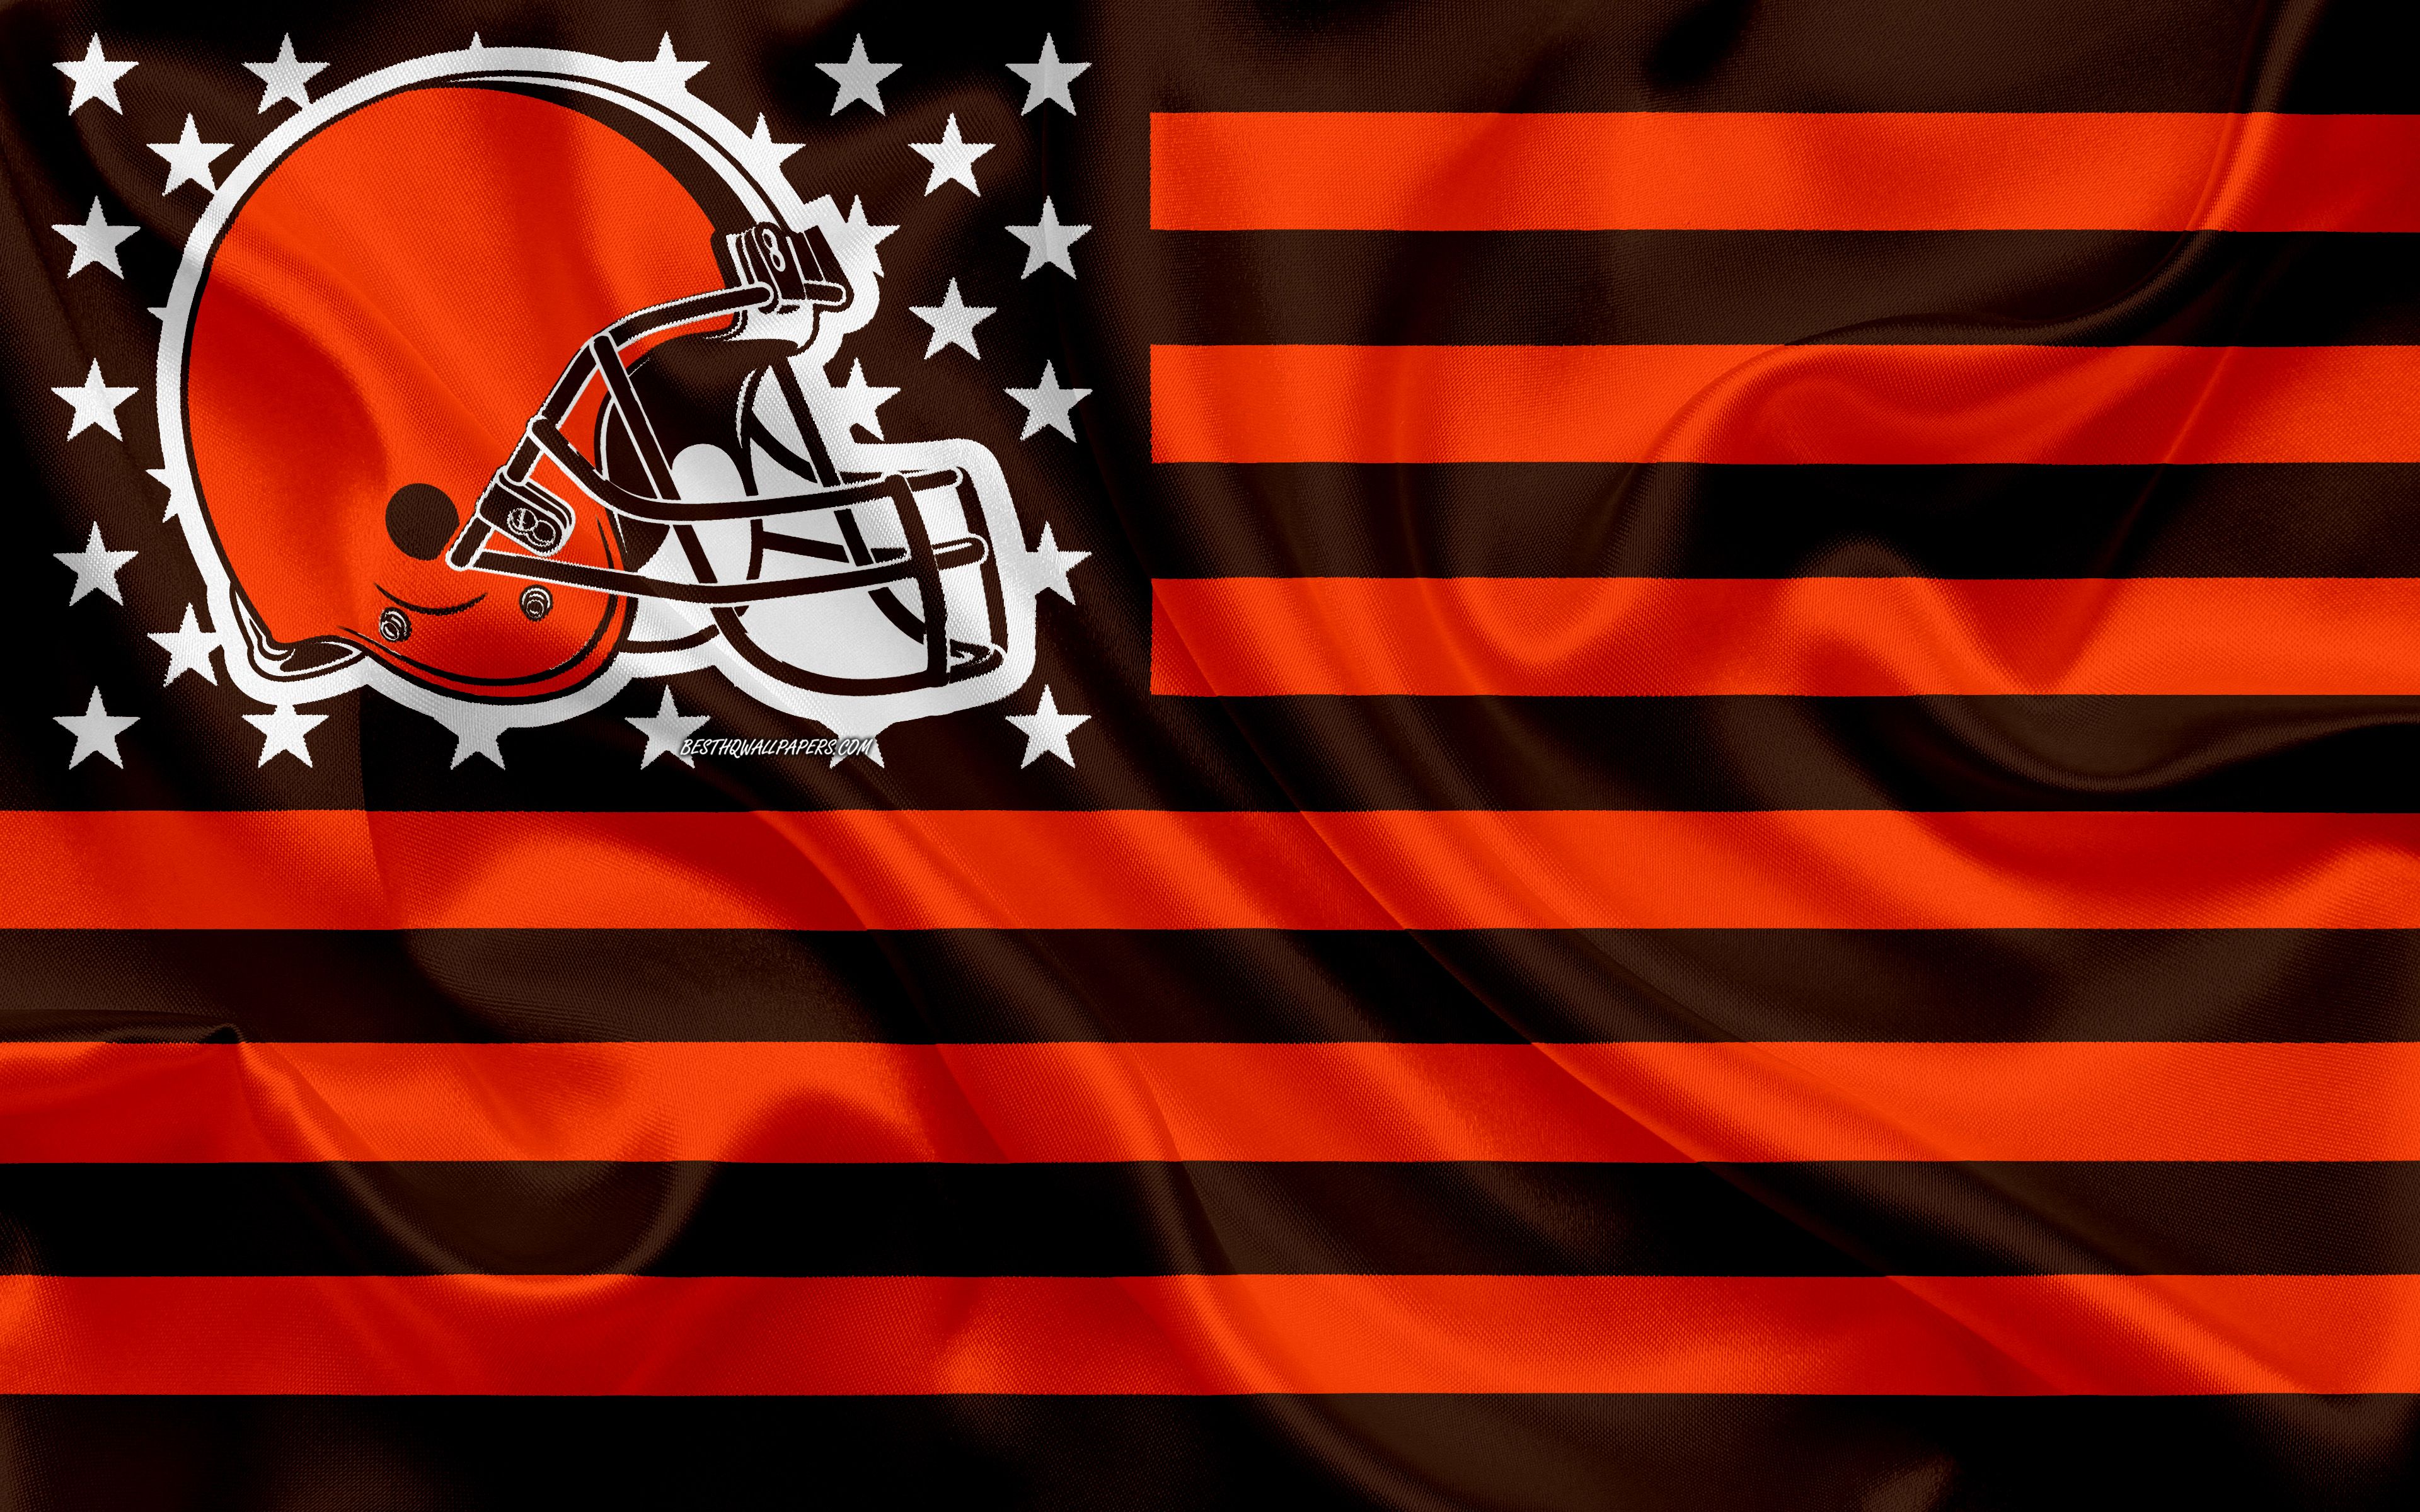 Cleveland browns 1080P 2K 4K 5K HD wallpapers free download  Wallpaper  Flare